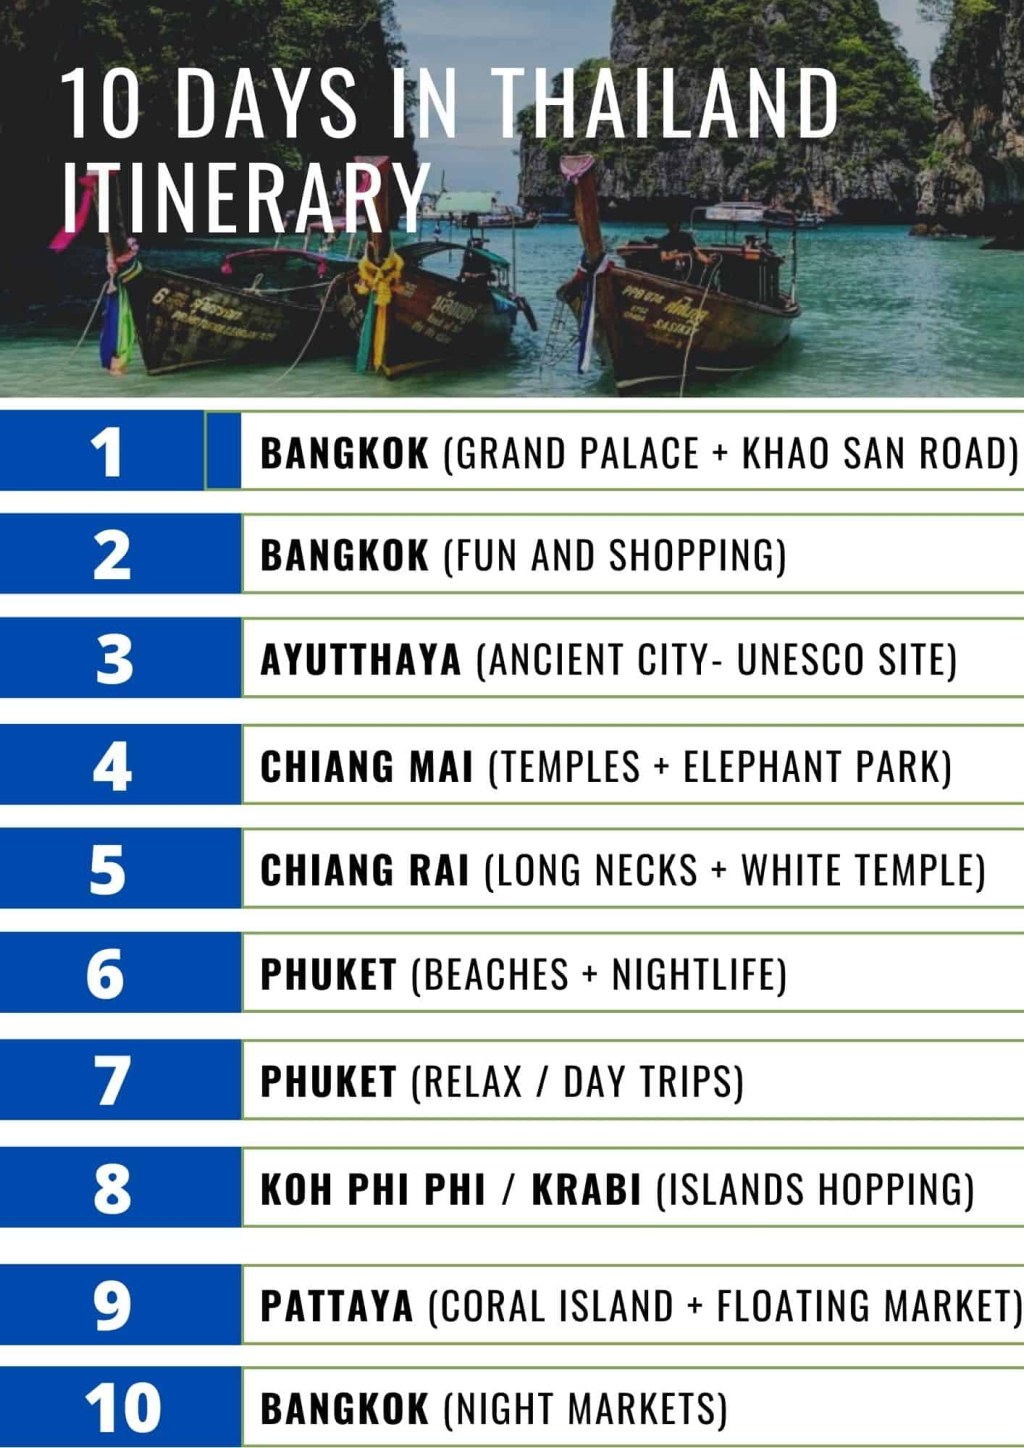 thailand trip itinerary 8 days - Days Thailand Itinerary: A Guide For First Time Visitors [+ Map